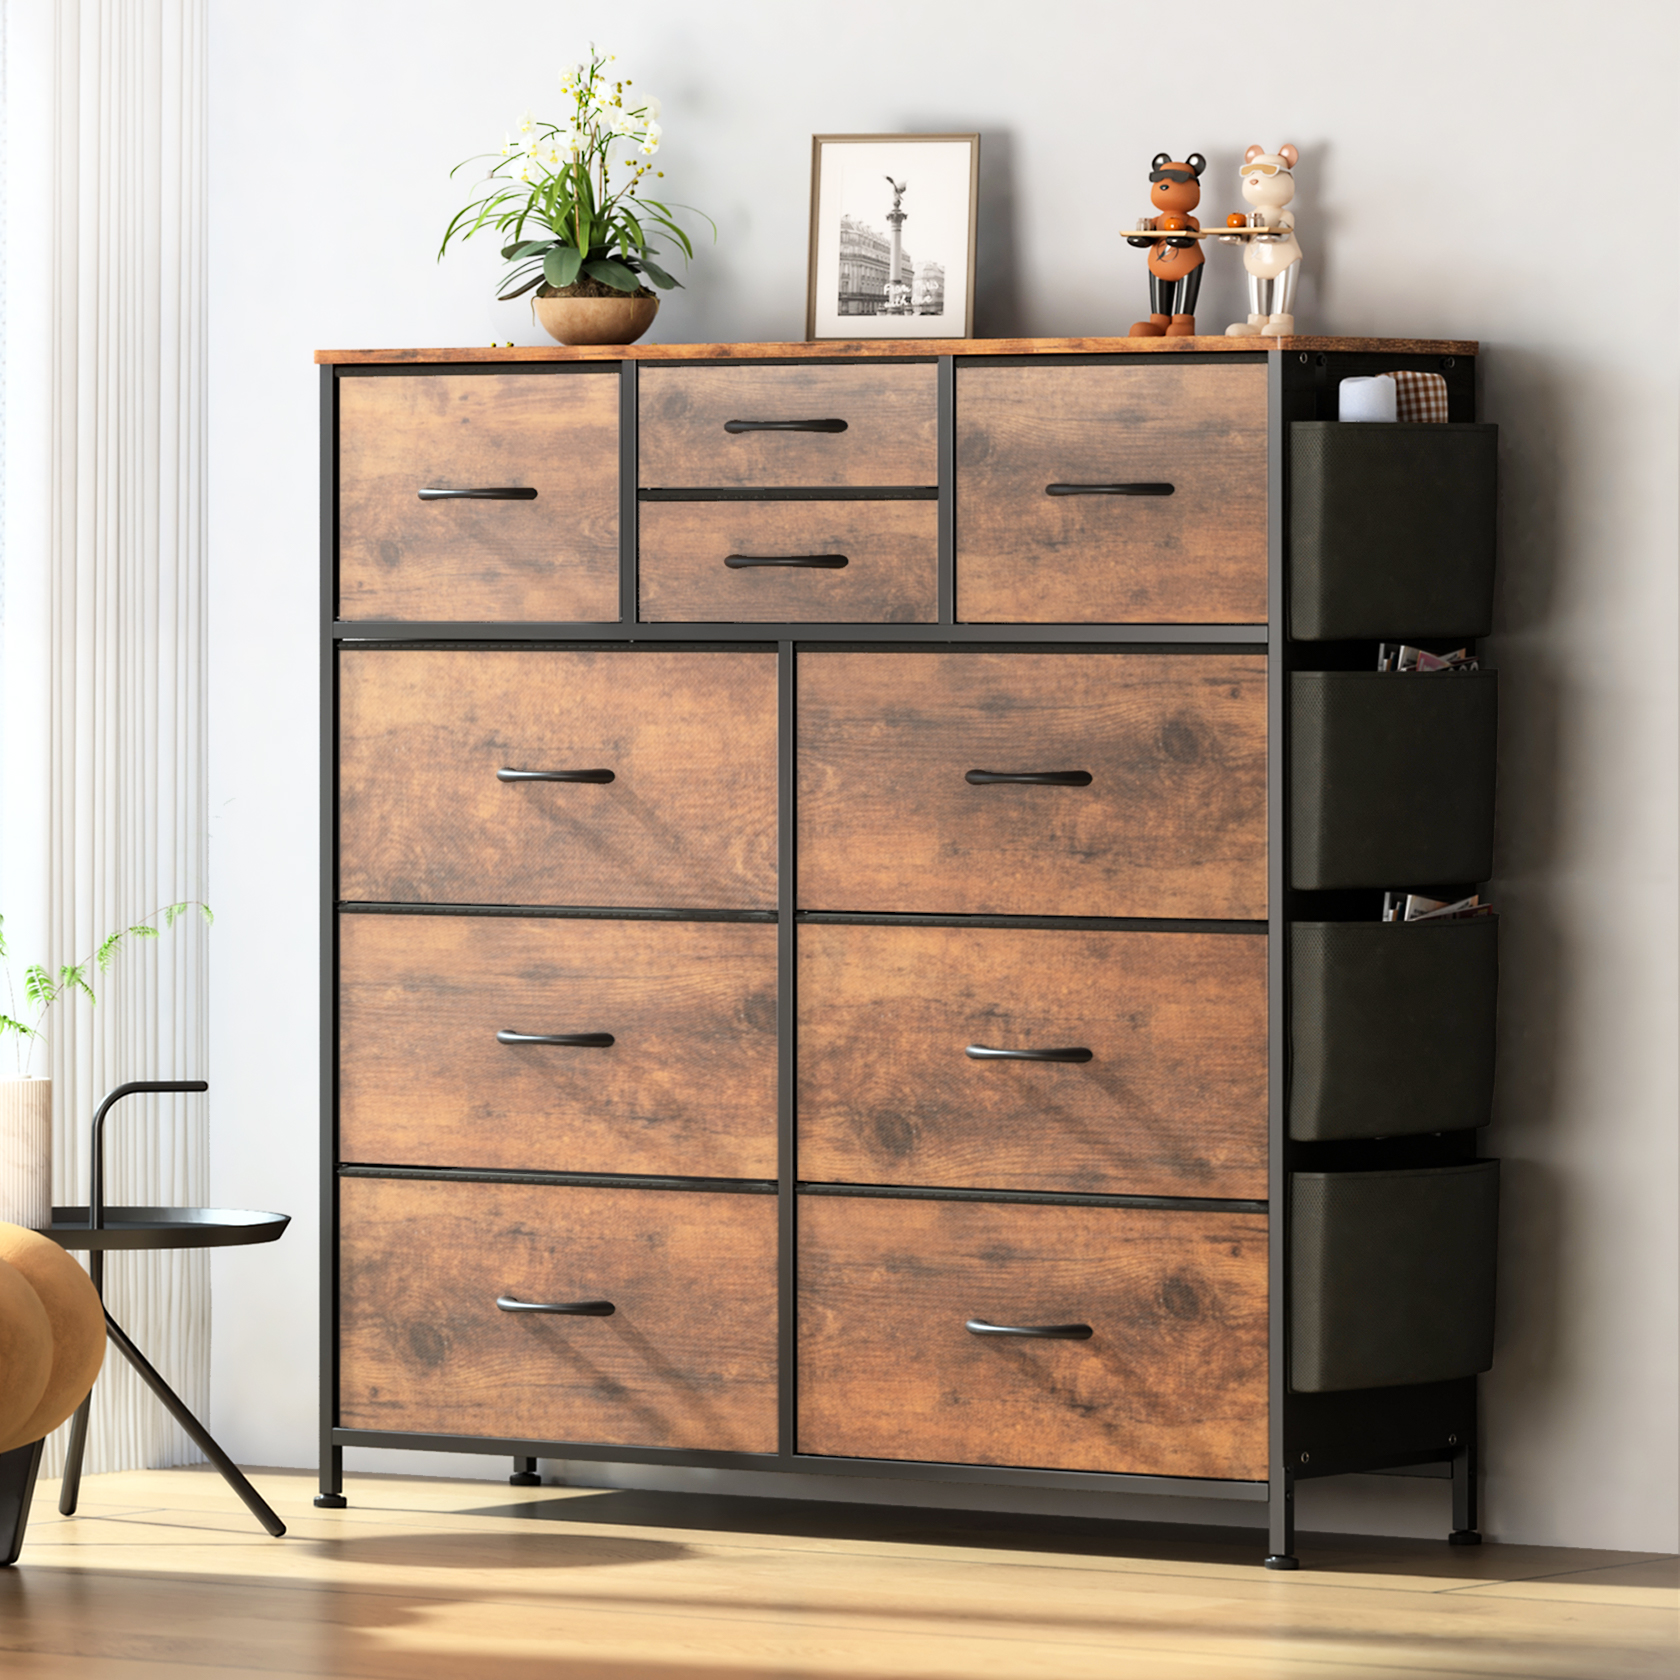 GIKPAL 10 Drawer Dresser, Chest of Drawers for Bedroom Fabric Dressers with Side Pockets and Hooks, Brown - image 1 of 12